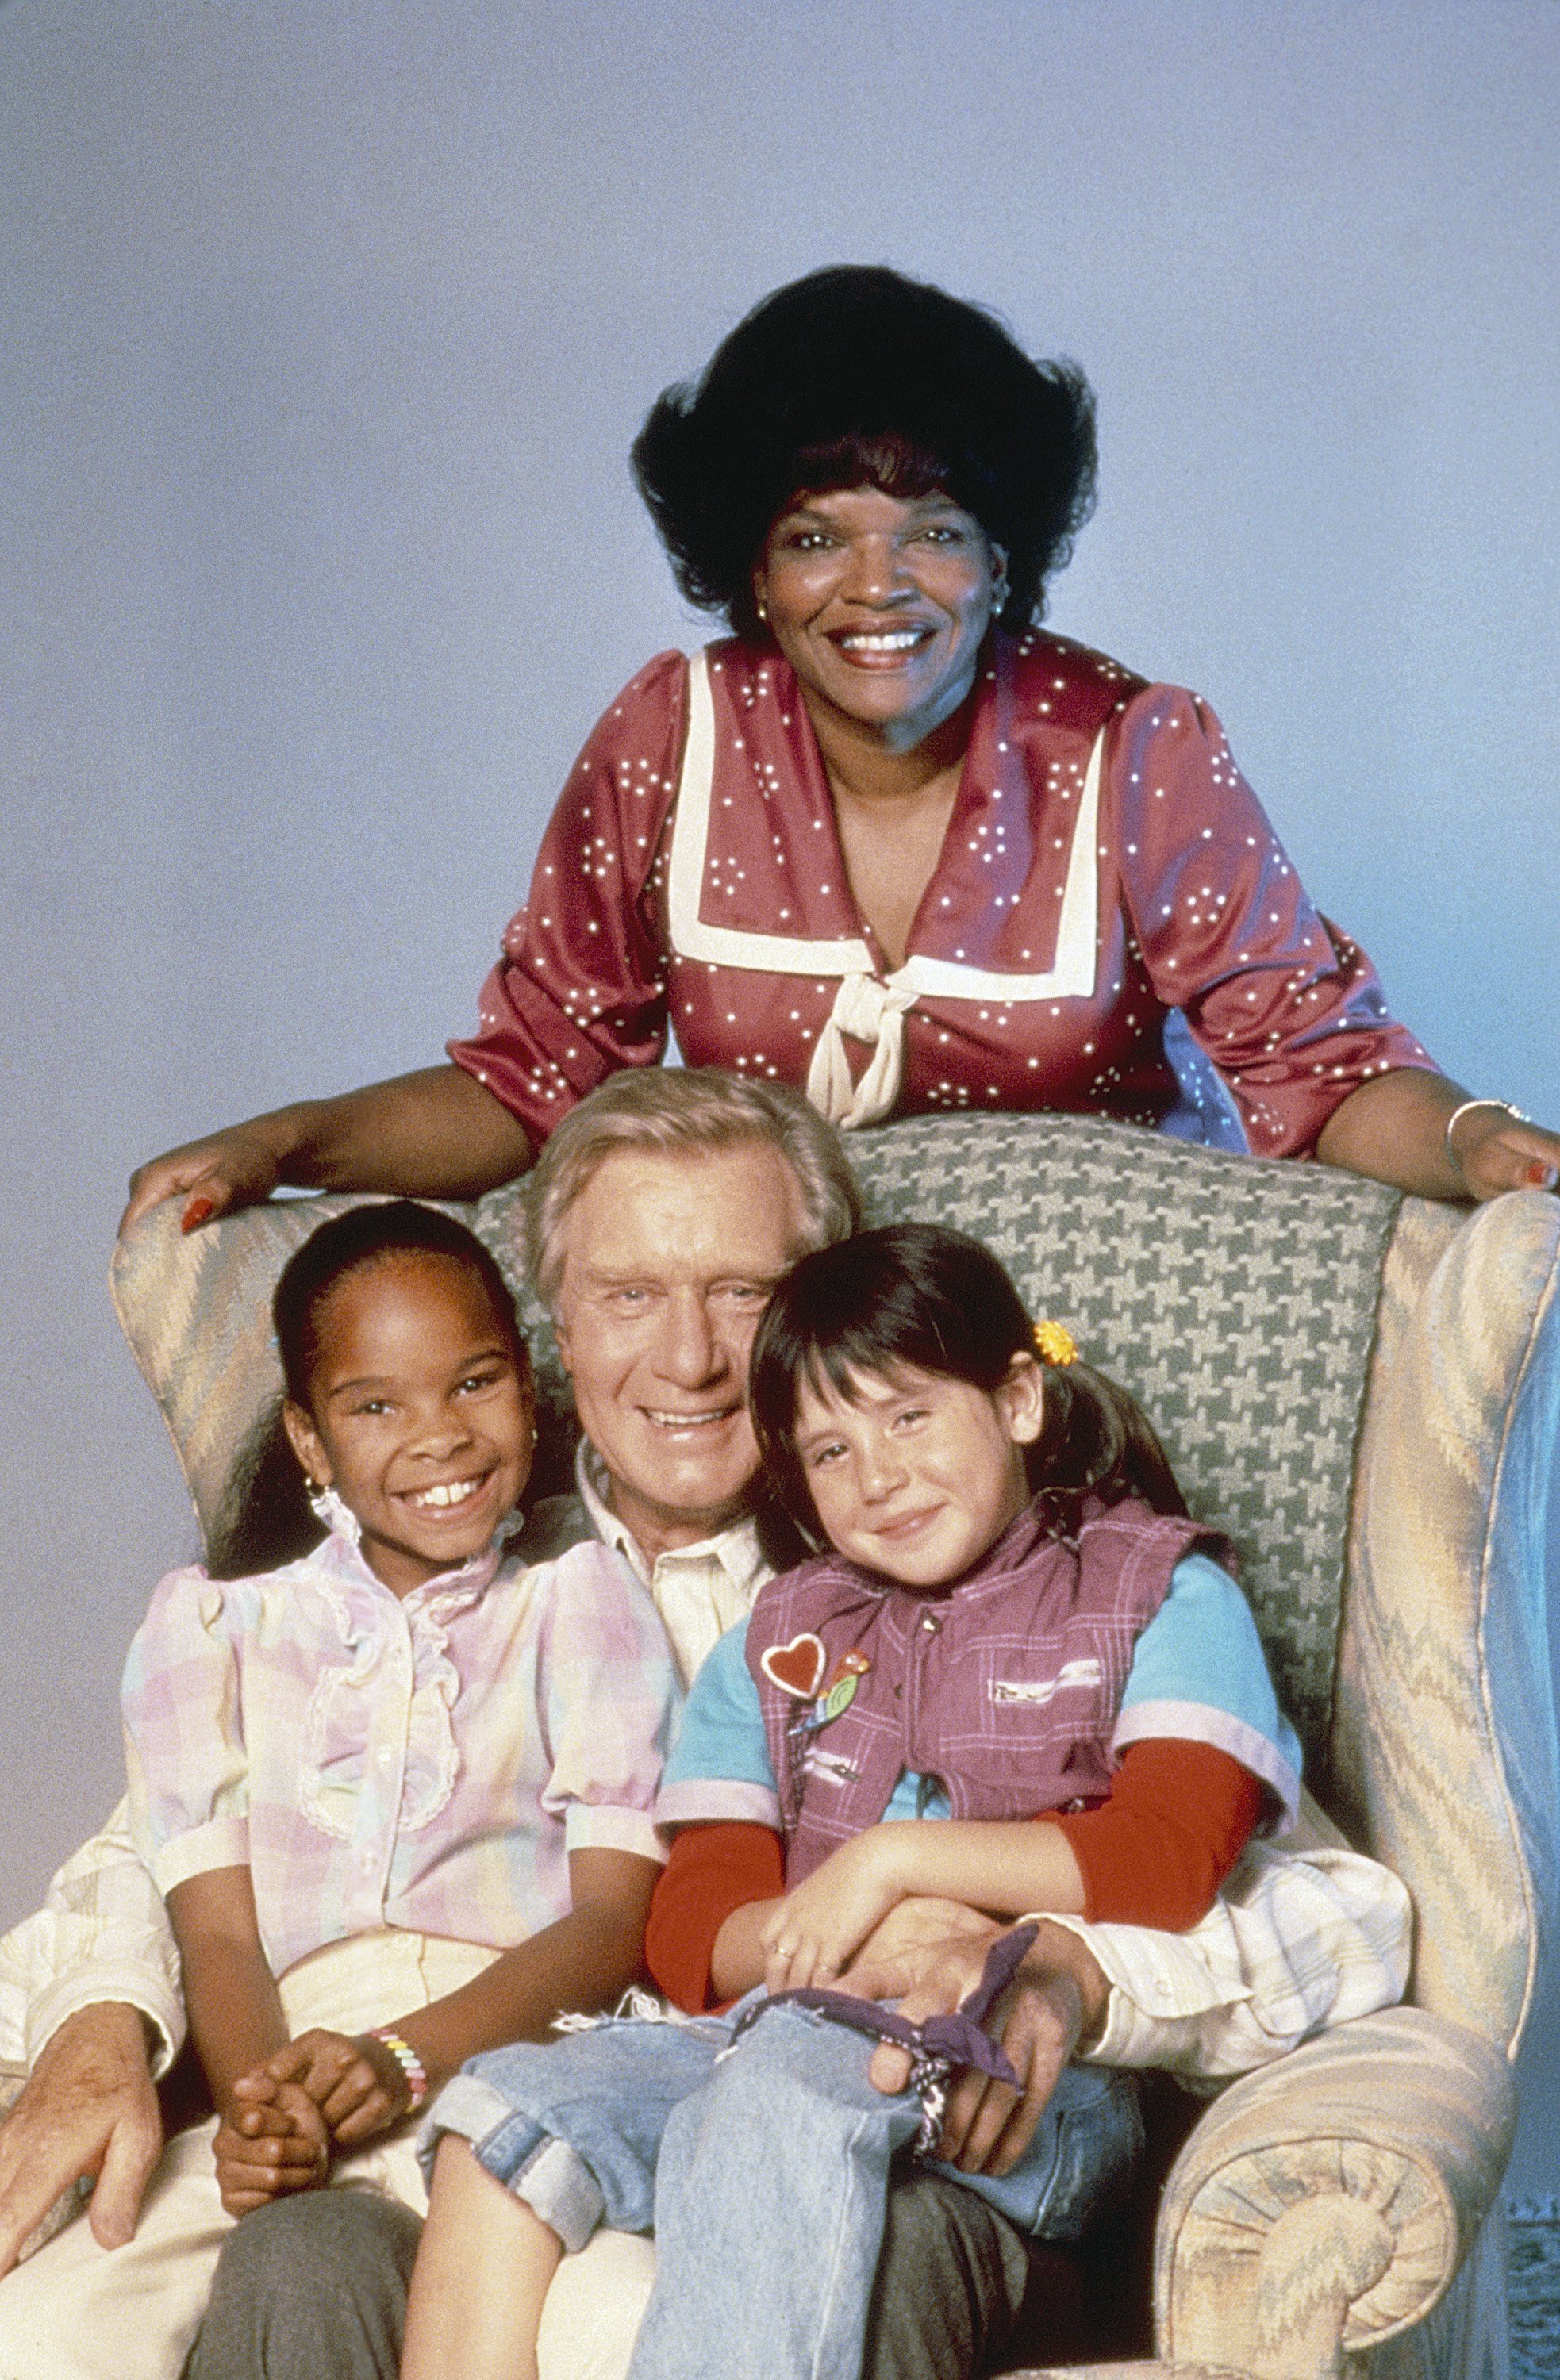 Susie Garrett, Cherie Johnson, George Gaynes and Soleil Moon  Frye in a promo shoot for "Punky Brewster" season 1 in 1984 | Photo: Getty Images 